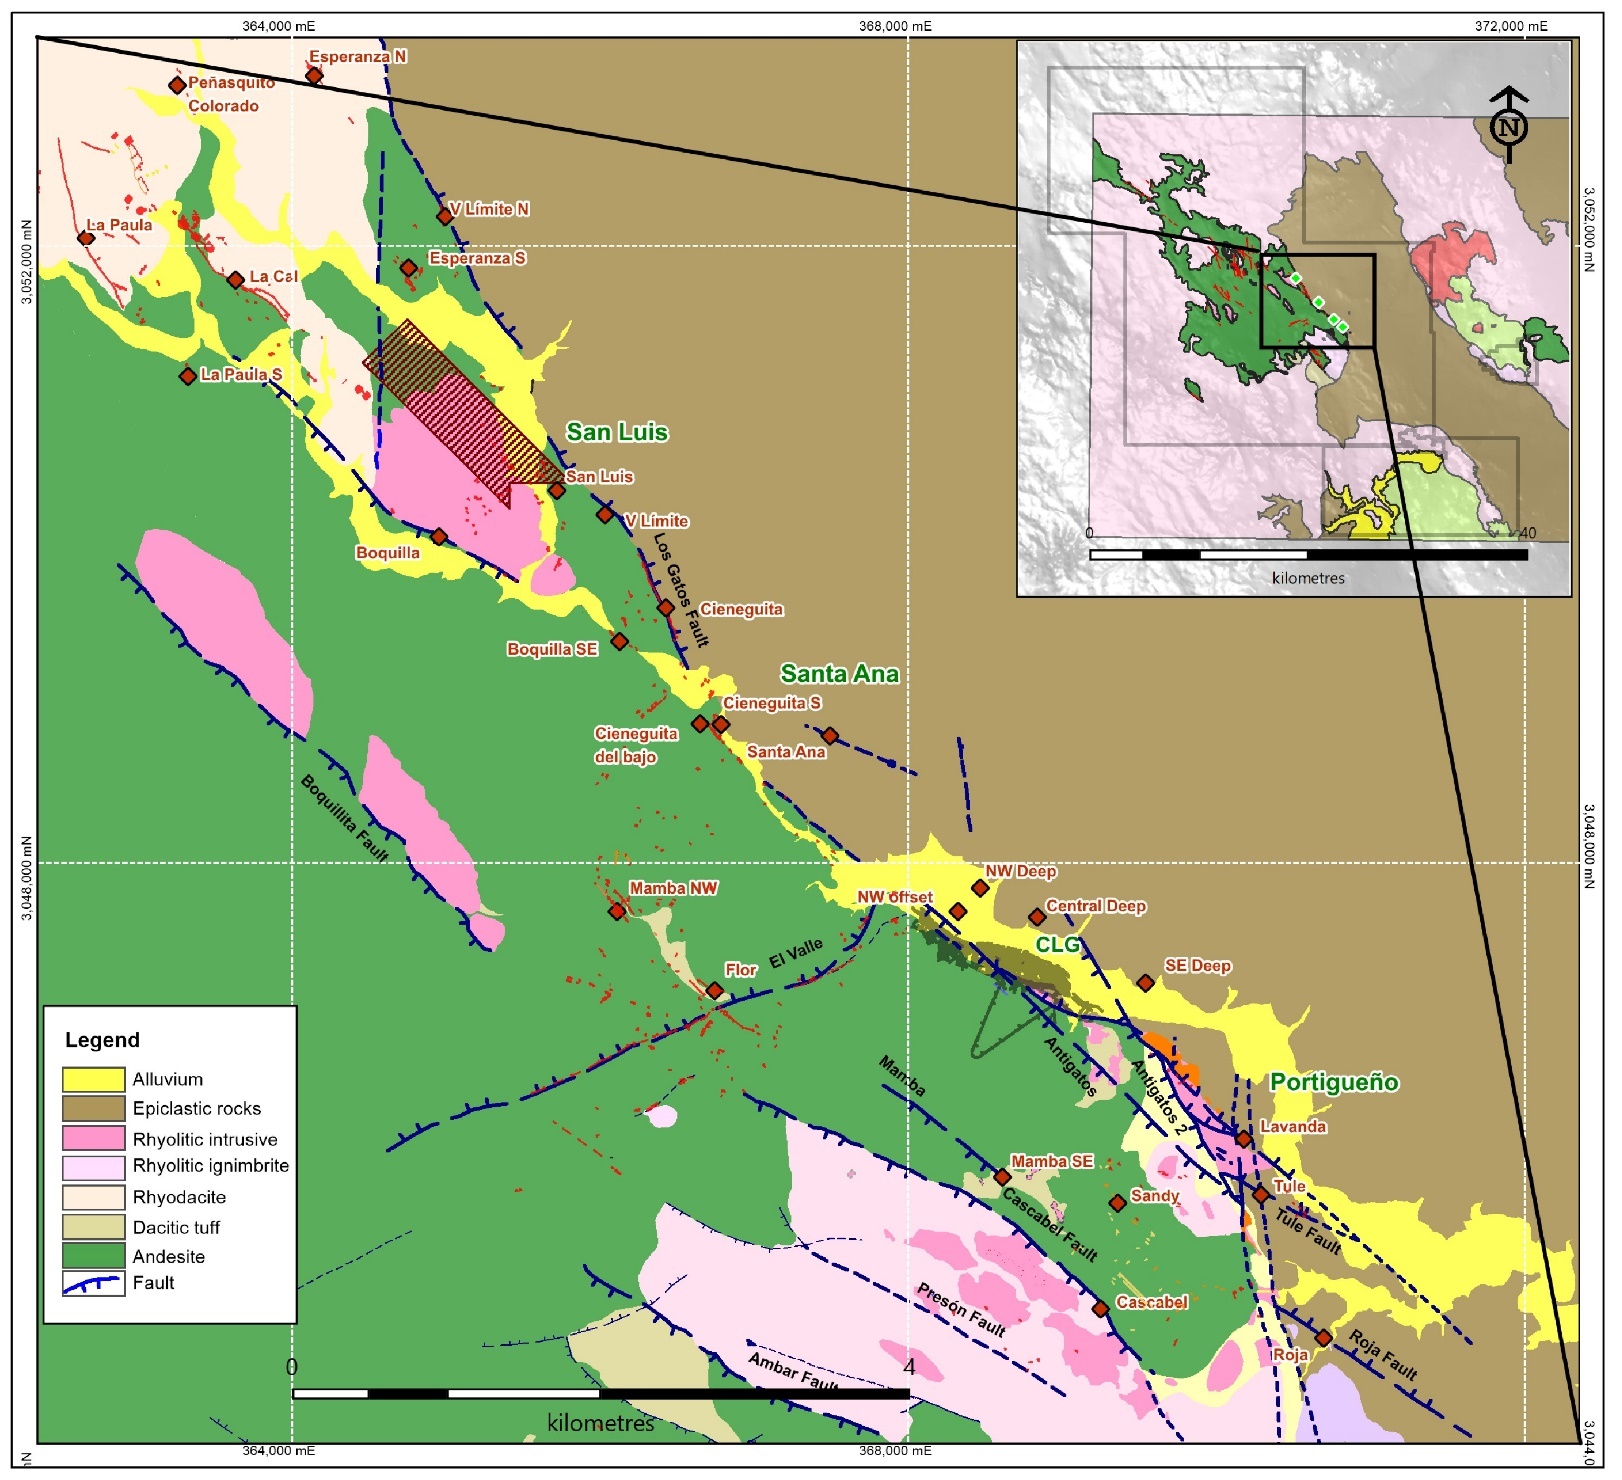 Plan view of the area surrounding CLG with select near-mine prospects and high priority drill targets